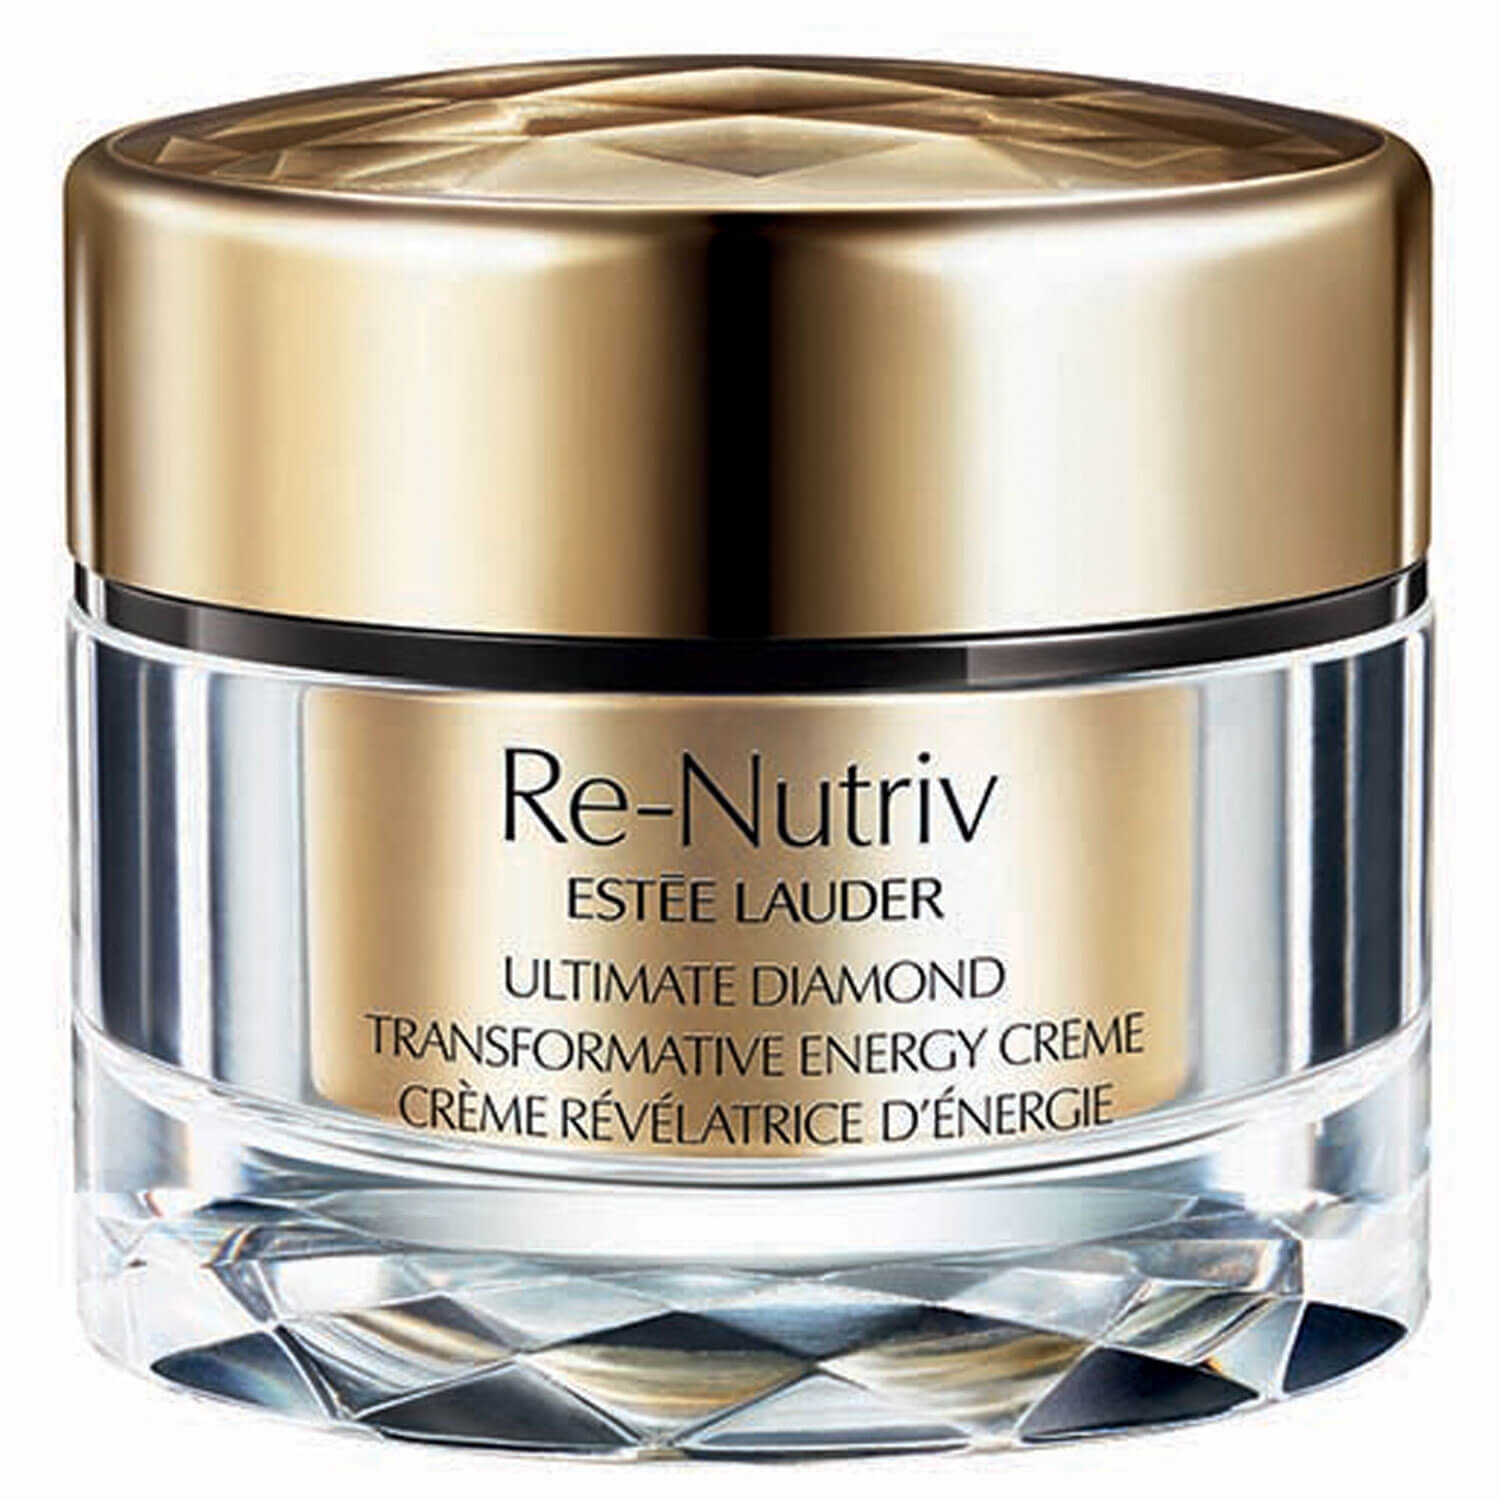 Product image from Re-Nutriv - Ultimate Diamond Transformative Energy Creme